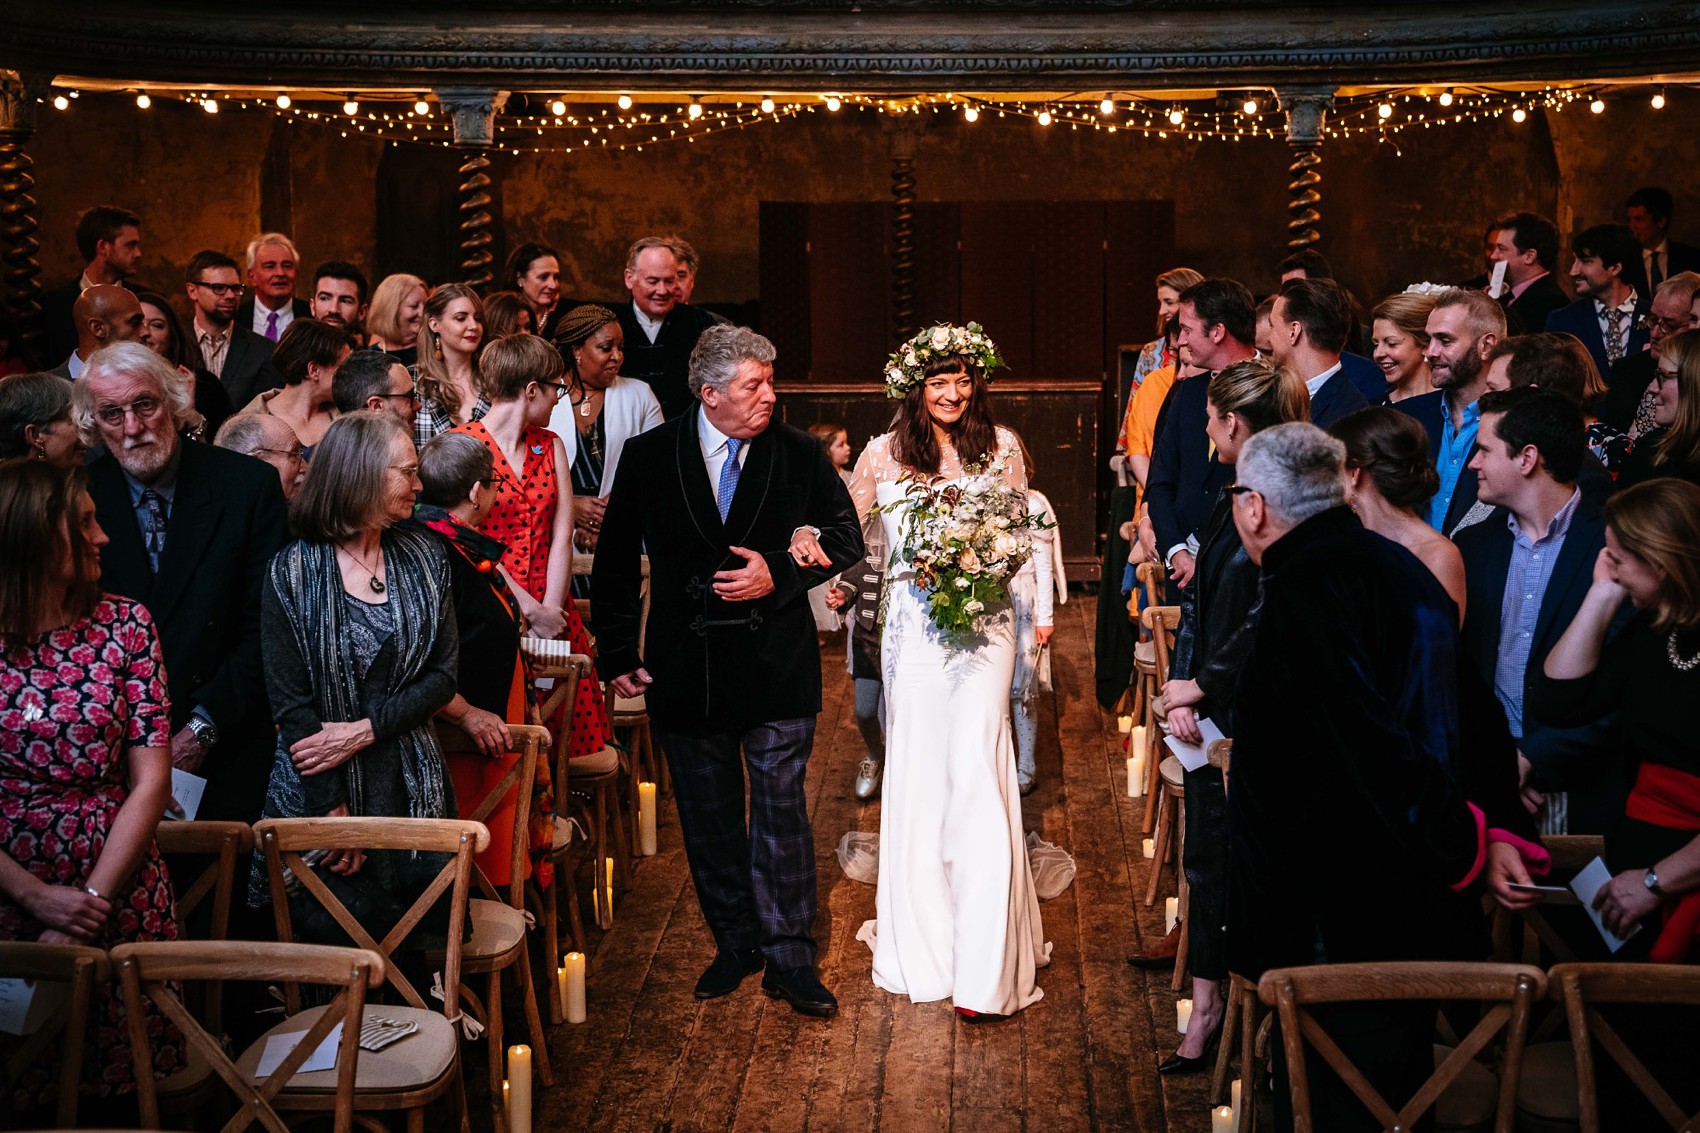  Wiltons Hall Wedding Bo Luca bride - A Bo & Luca Bride in a Floral Crown for a Beautiful, Blended Family Wedding at Wilton's Music Hall